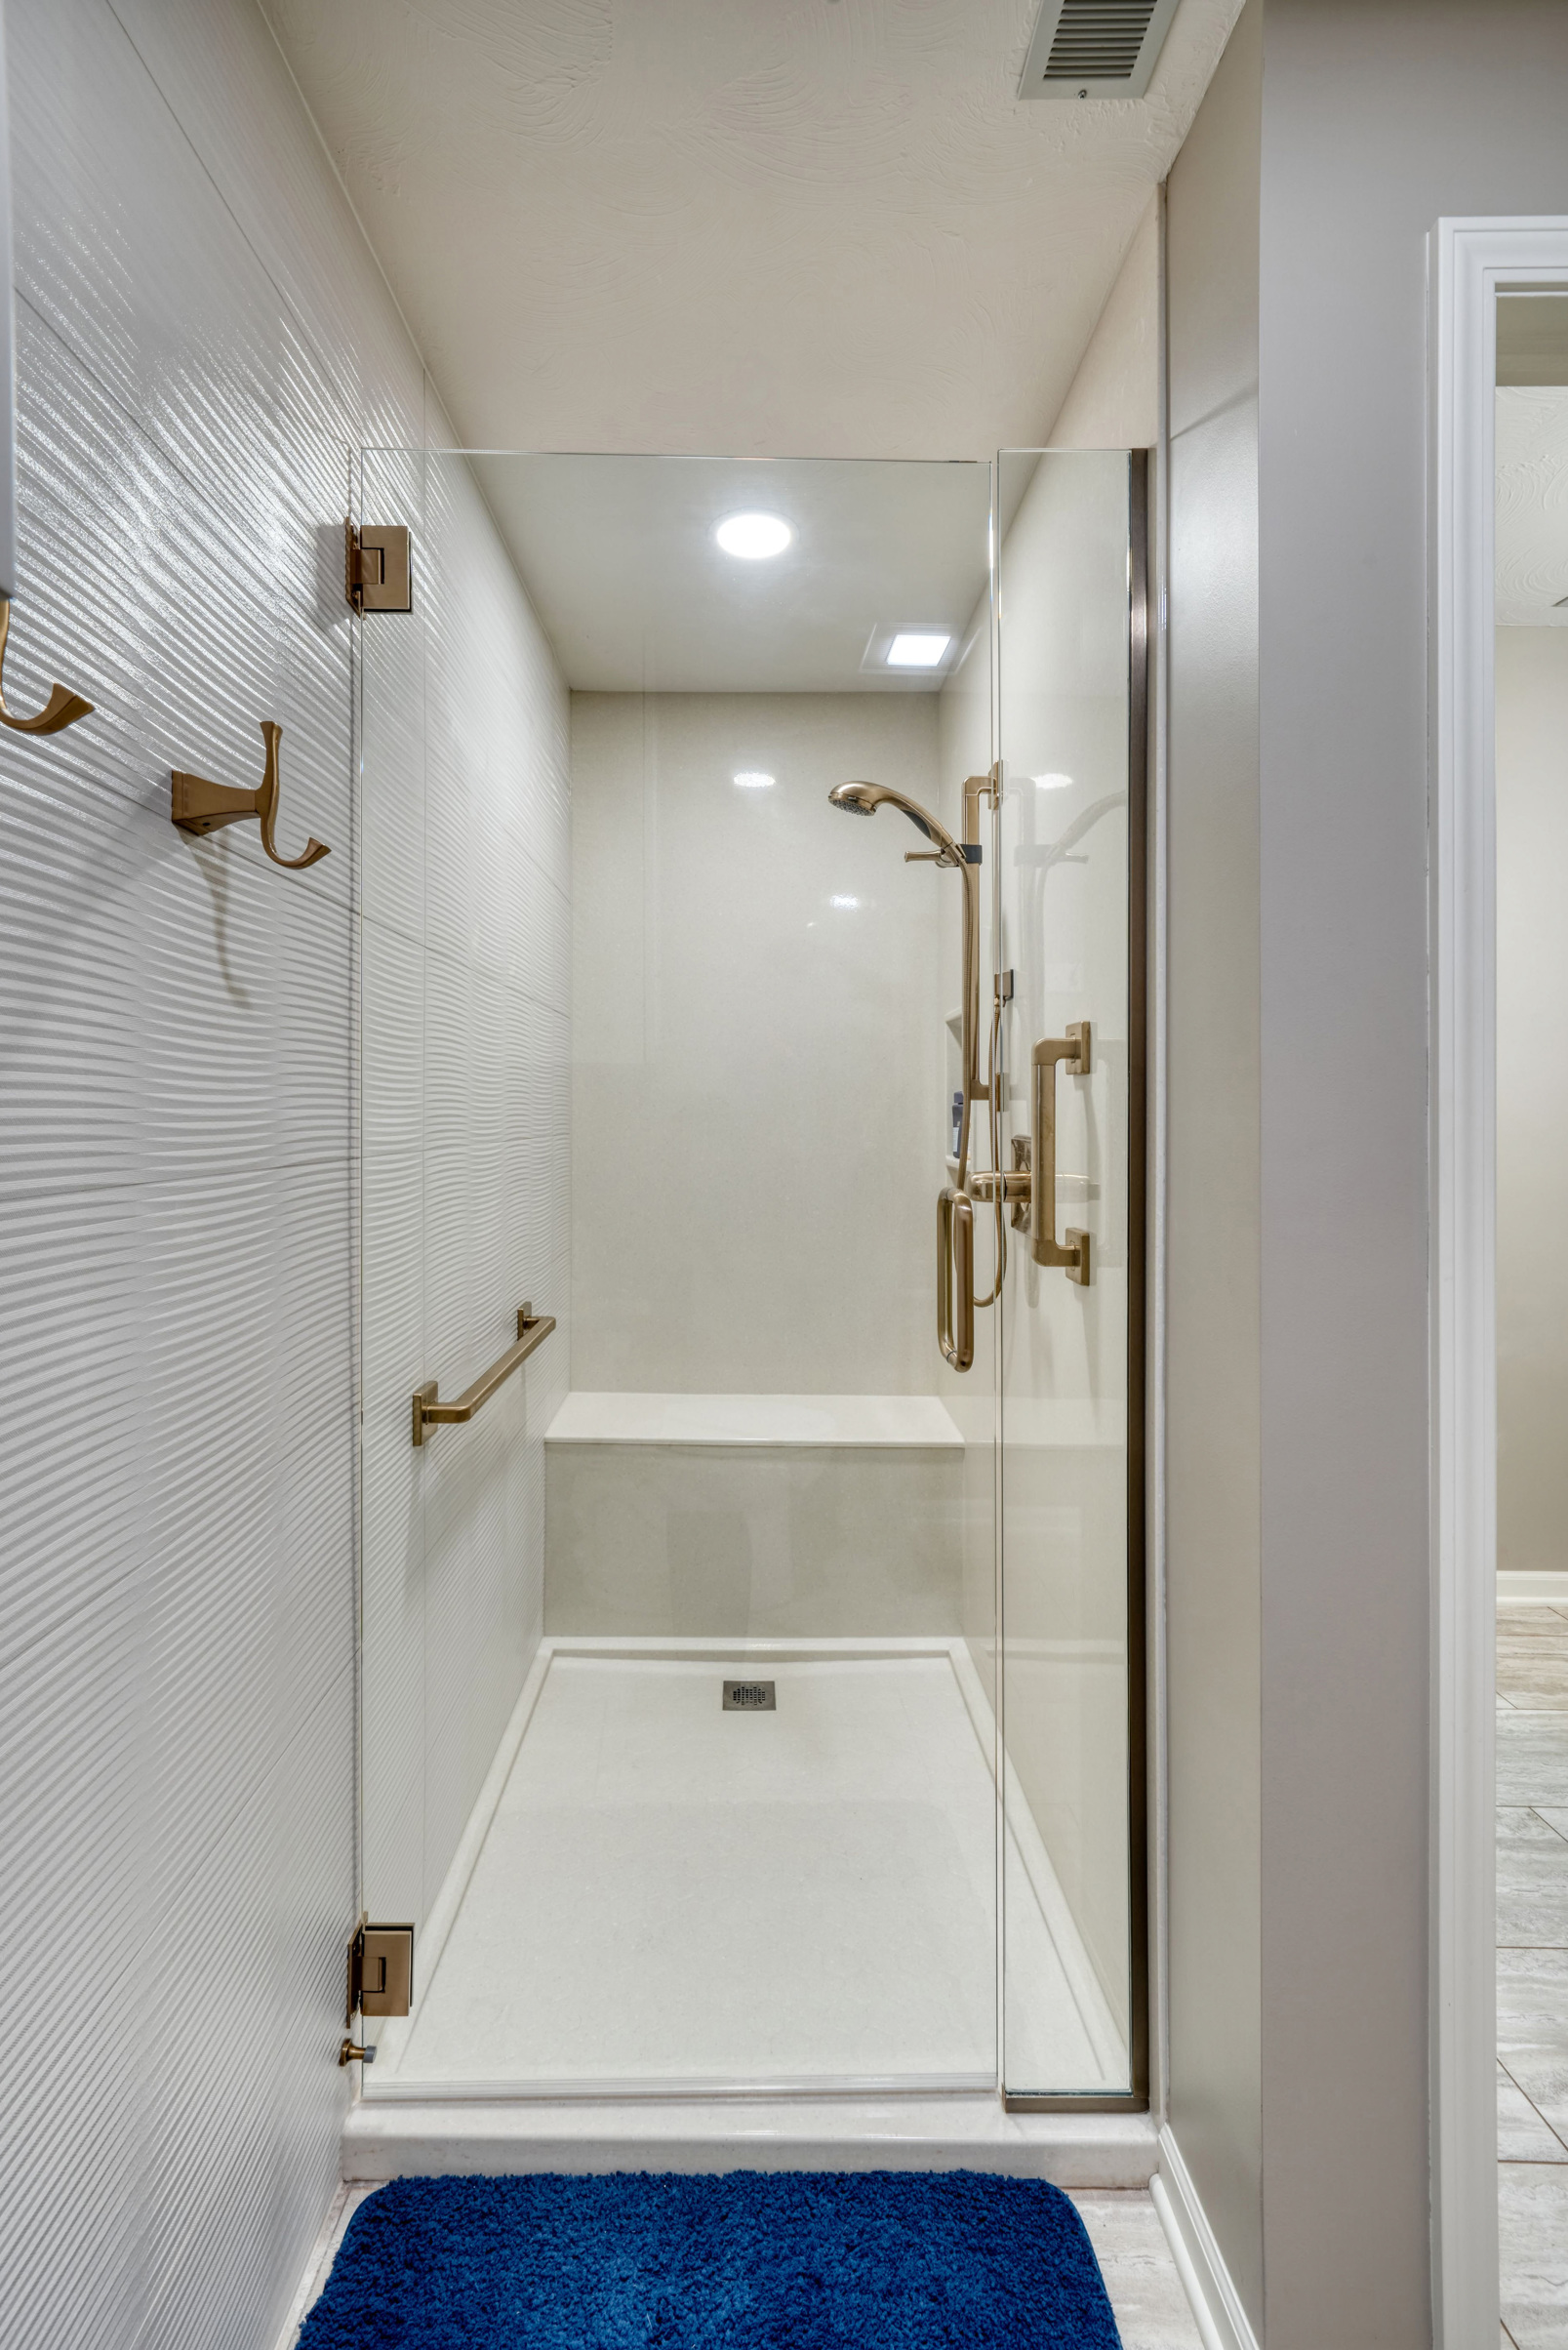 Remodeled bathroom with stand-in shower with built-in seating and grab bar.